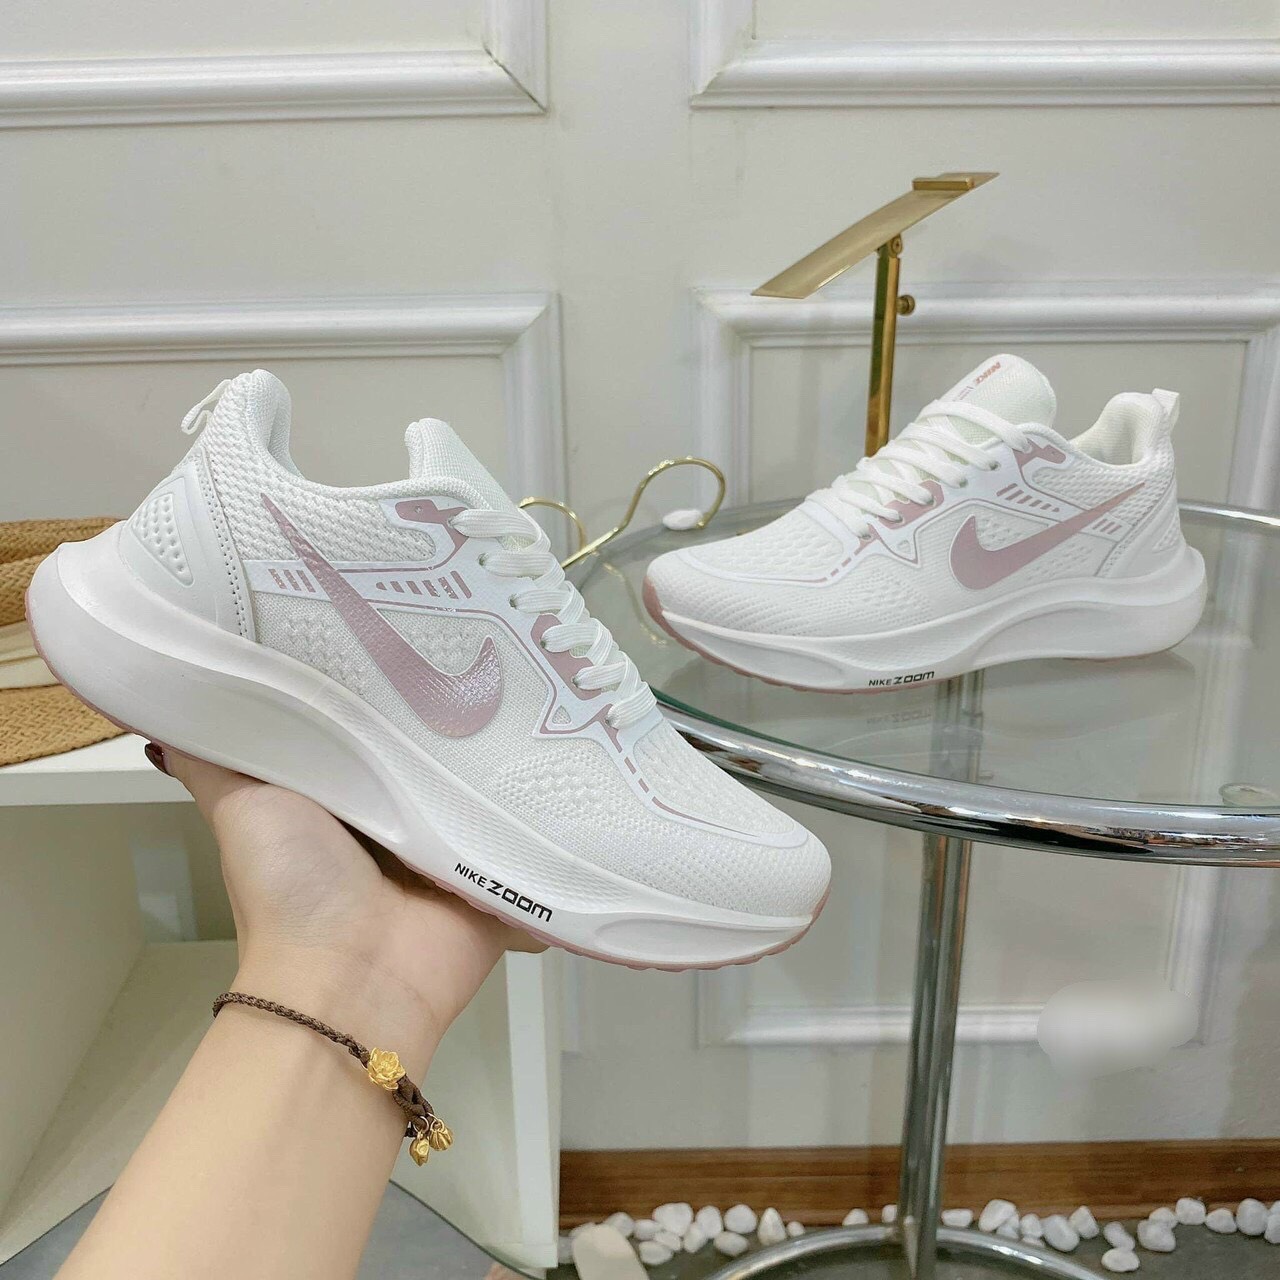 Giày Nike Zoom Water Shell Trắng Rep 1:1